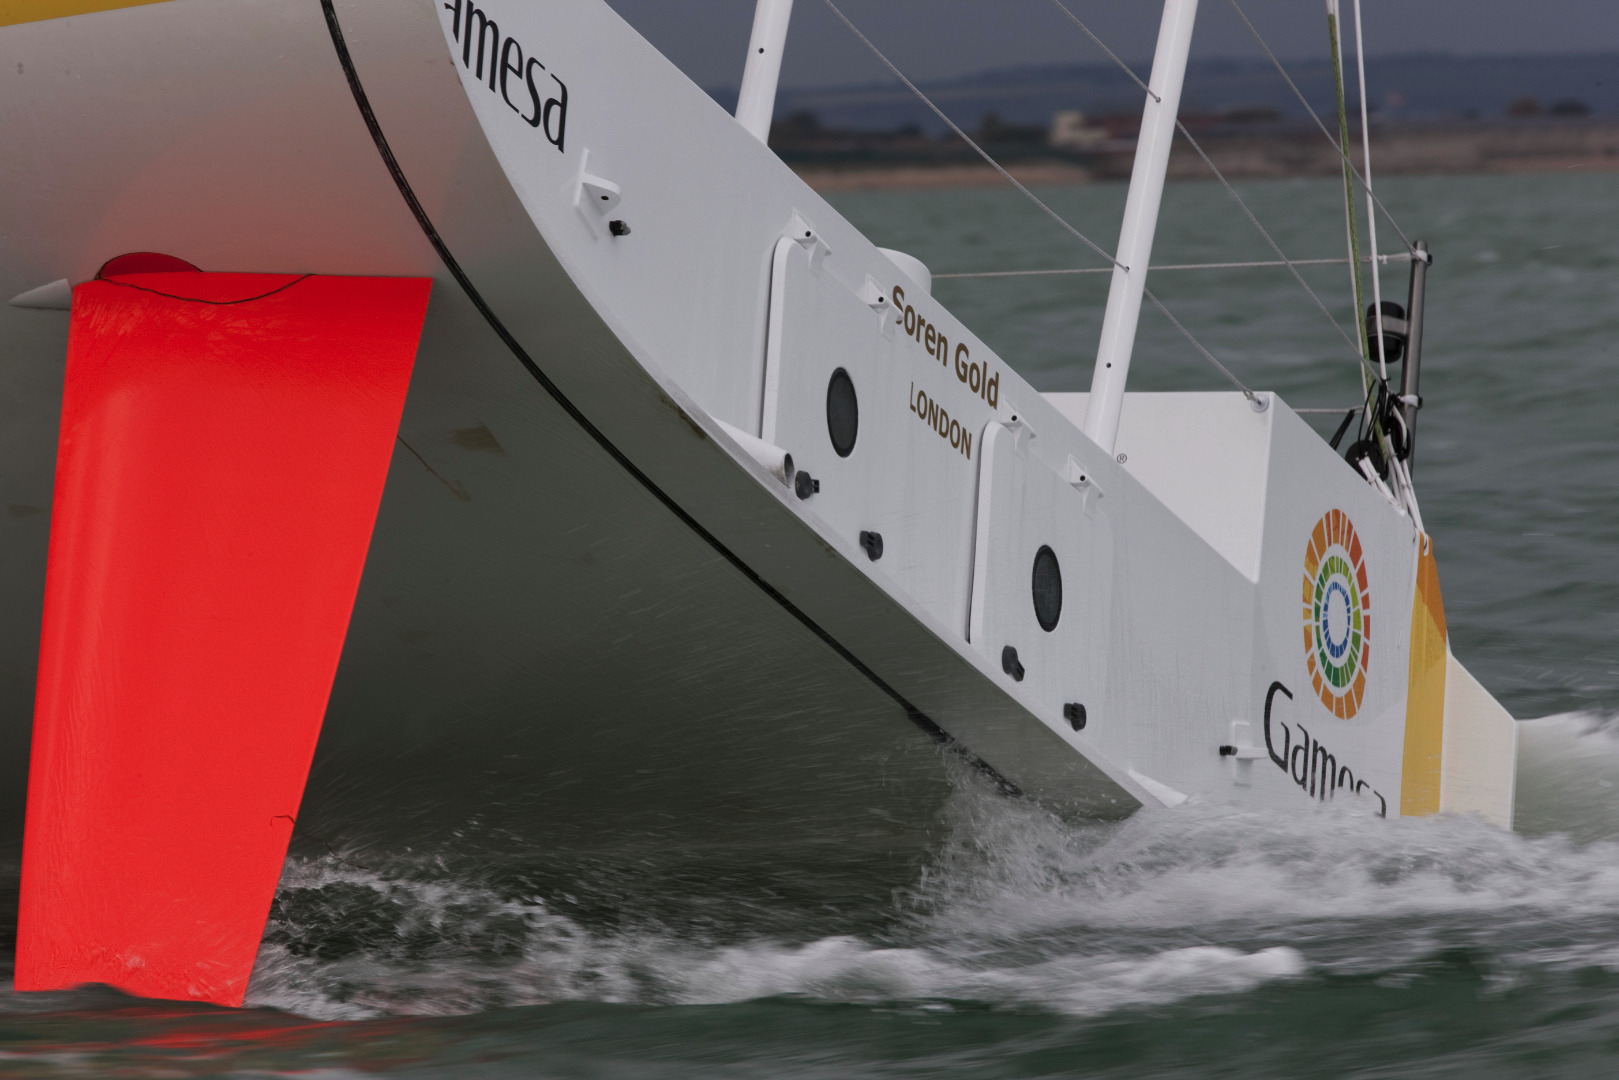 This is Gamesa, an IMOCA Open 60 design with an interceptor deployed, an innovation for sailing yacht design by naval architects Owen Clarke Design. This is a trim control device allowing  yacht to have two modes, effectively two rocker profiles: with a considerable reduction in hull drag across a wide speed range in flat water and  bow up trim, with high manoeuvrability and safety in medium to large waves.